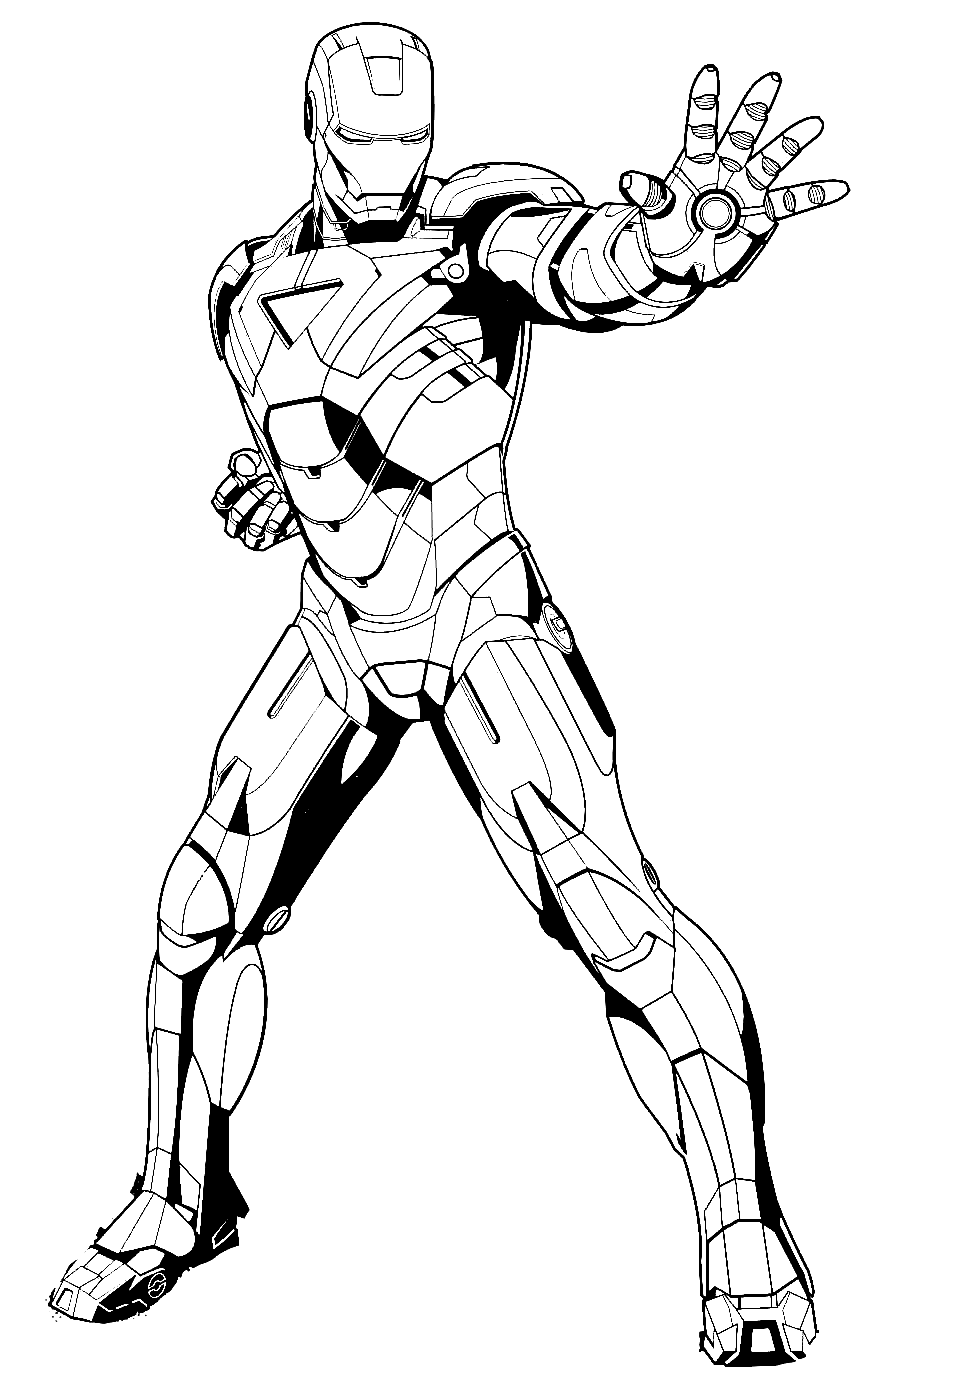 Iron man from Iron man movie tries to stop the enemy Coloring Pages